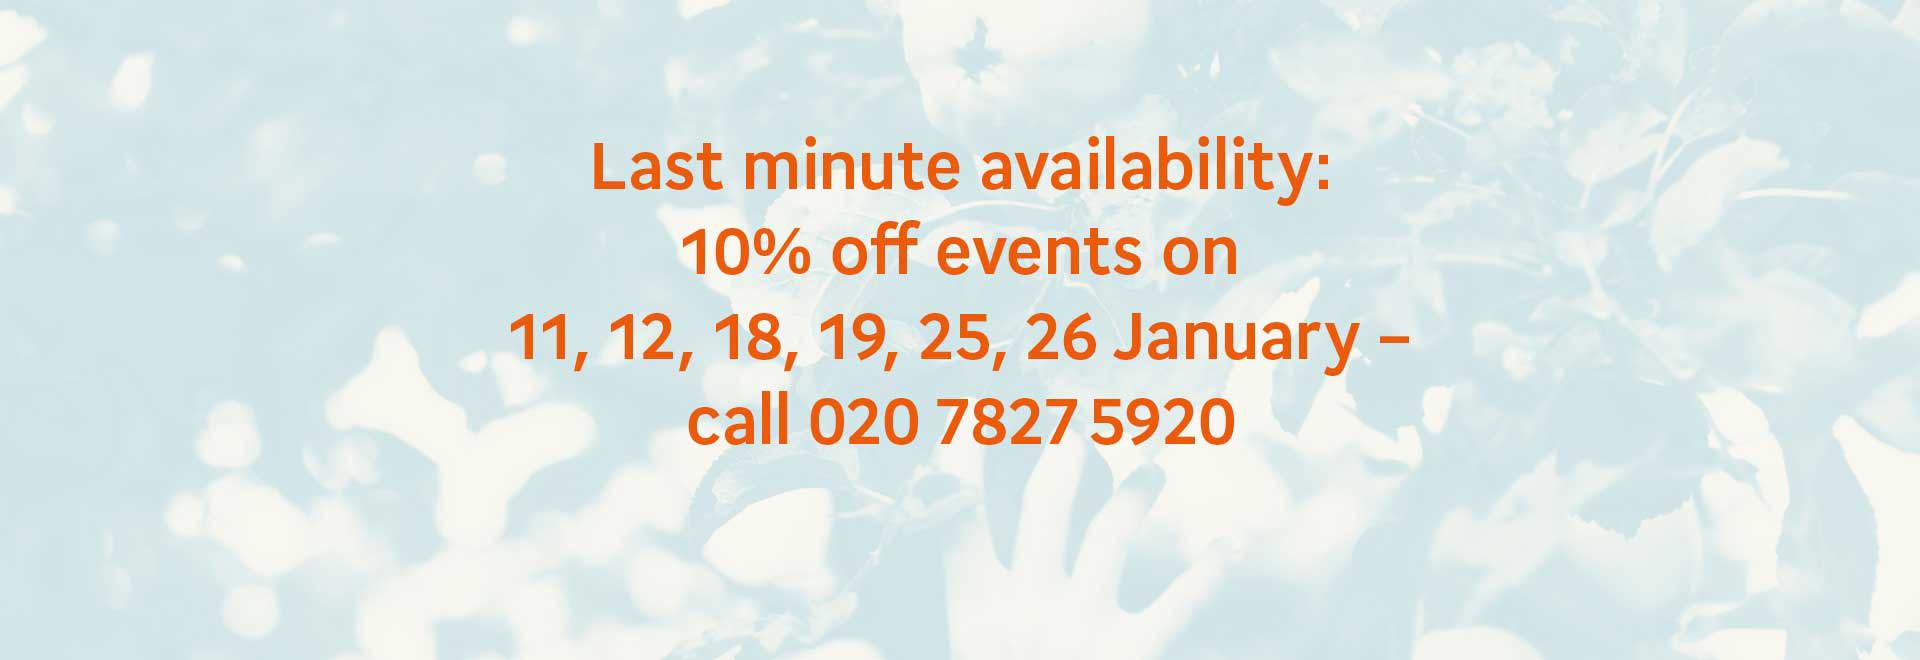 Last minute availability: 10% off events booked on 11, 12, 18, 19, 25 and 26 January - call 020 7827 5920